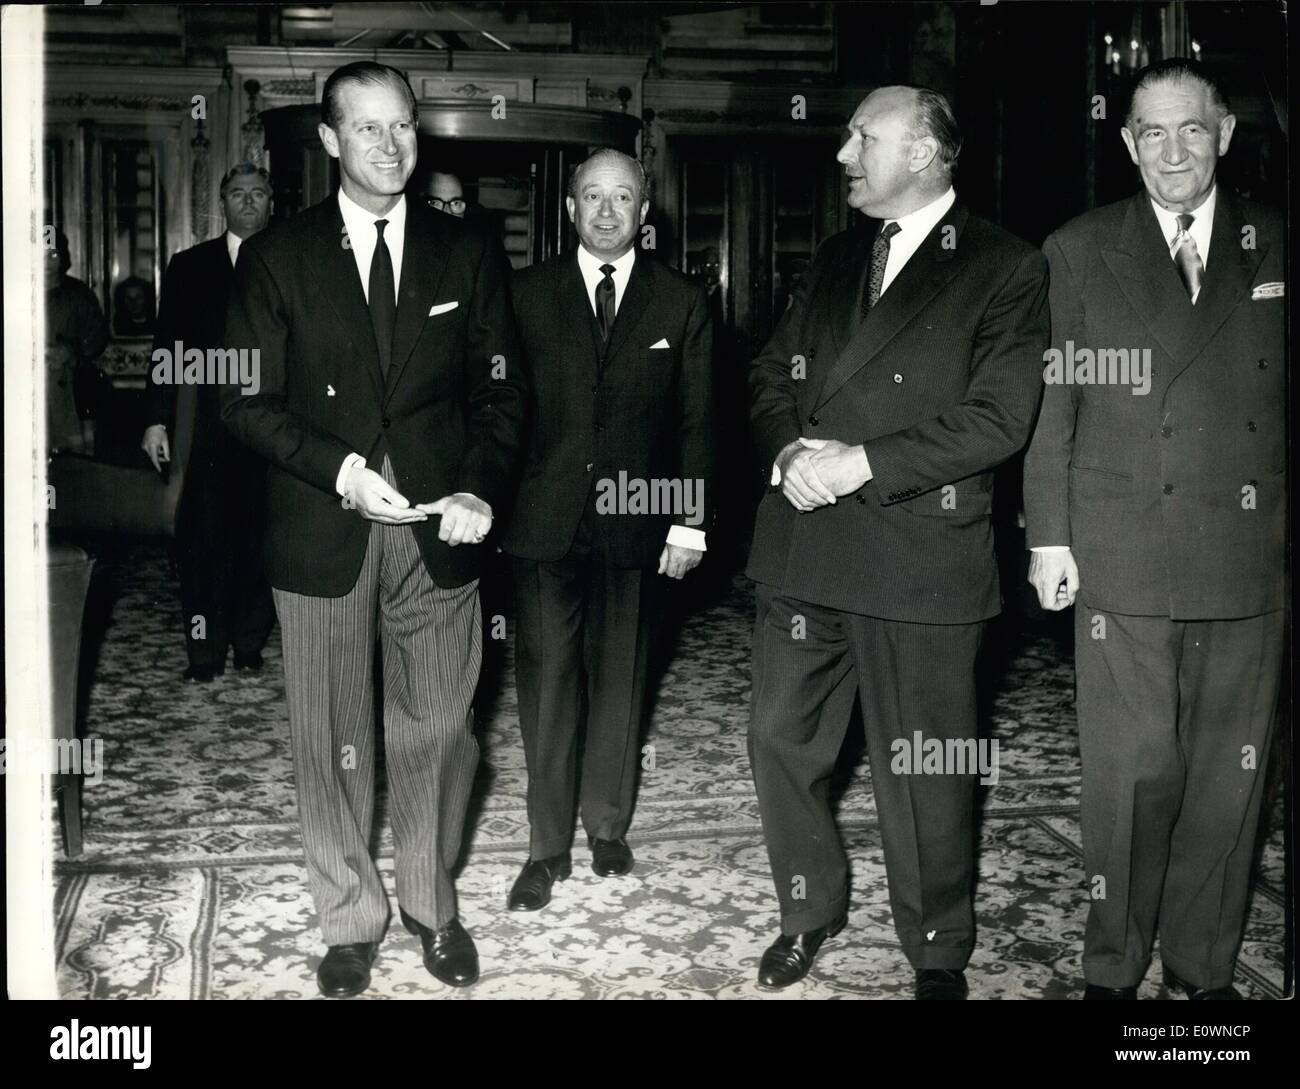 Oct. 10, 1963 - Duke AT Coal Industry Society Luncheon London: H.RH. Prince Philip (Left) pictured on his arrival at the Cafe Royal, London, today attend the 200th Luncheon of the Coal Industry Society. Walking the Duke are (from second left to right): Mr. R.G.C. Cowe, This year's Chairman of the Society, Lord Robens, Chairman of the National Coal Board, and Mr. J. Stanley Turner, the president of the society. Stock Photo